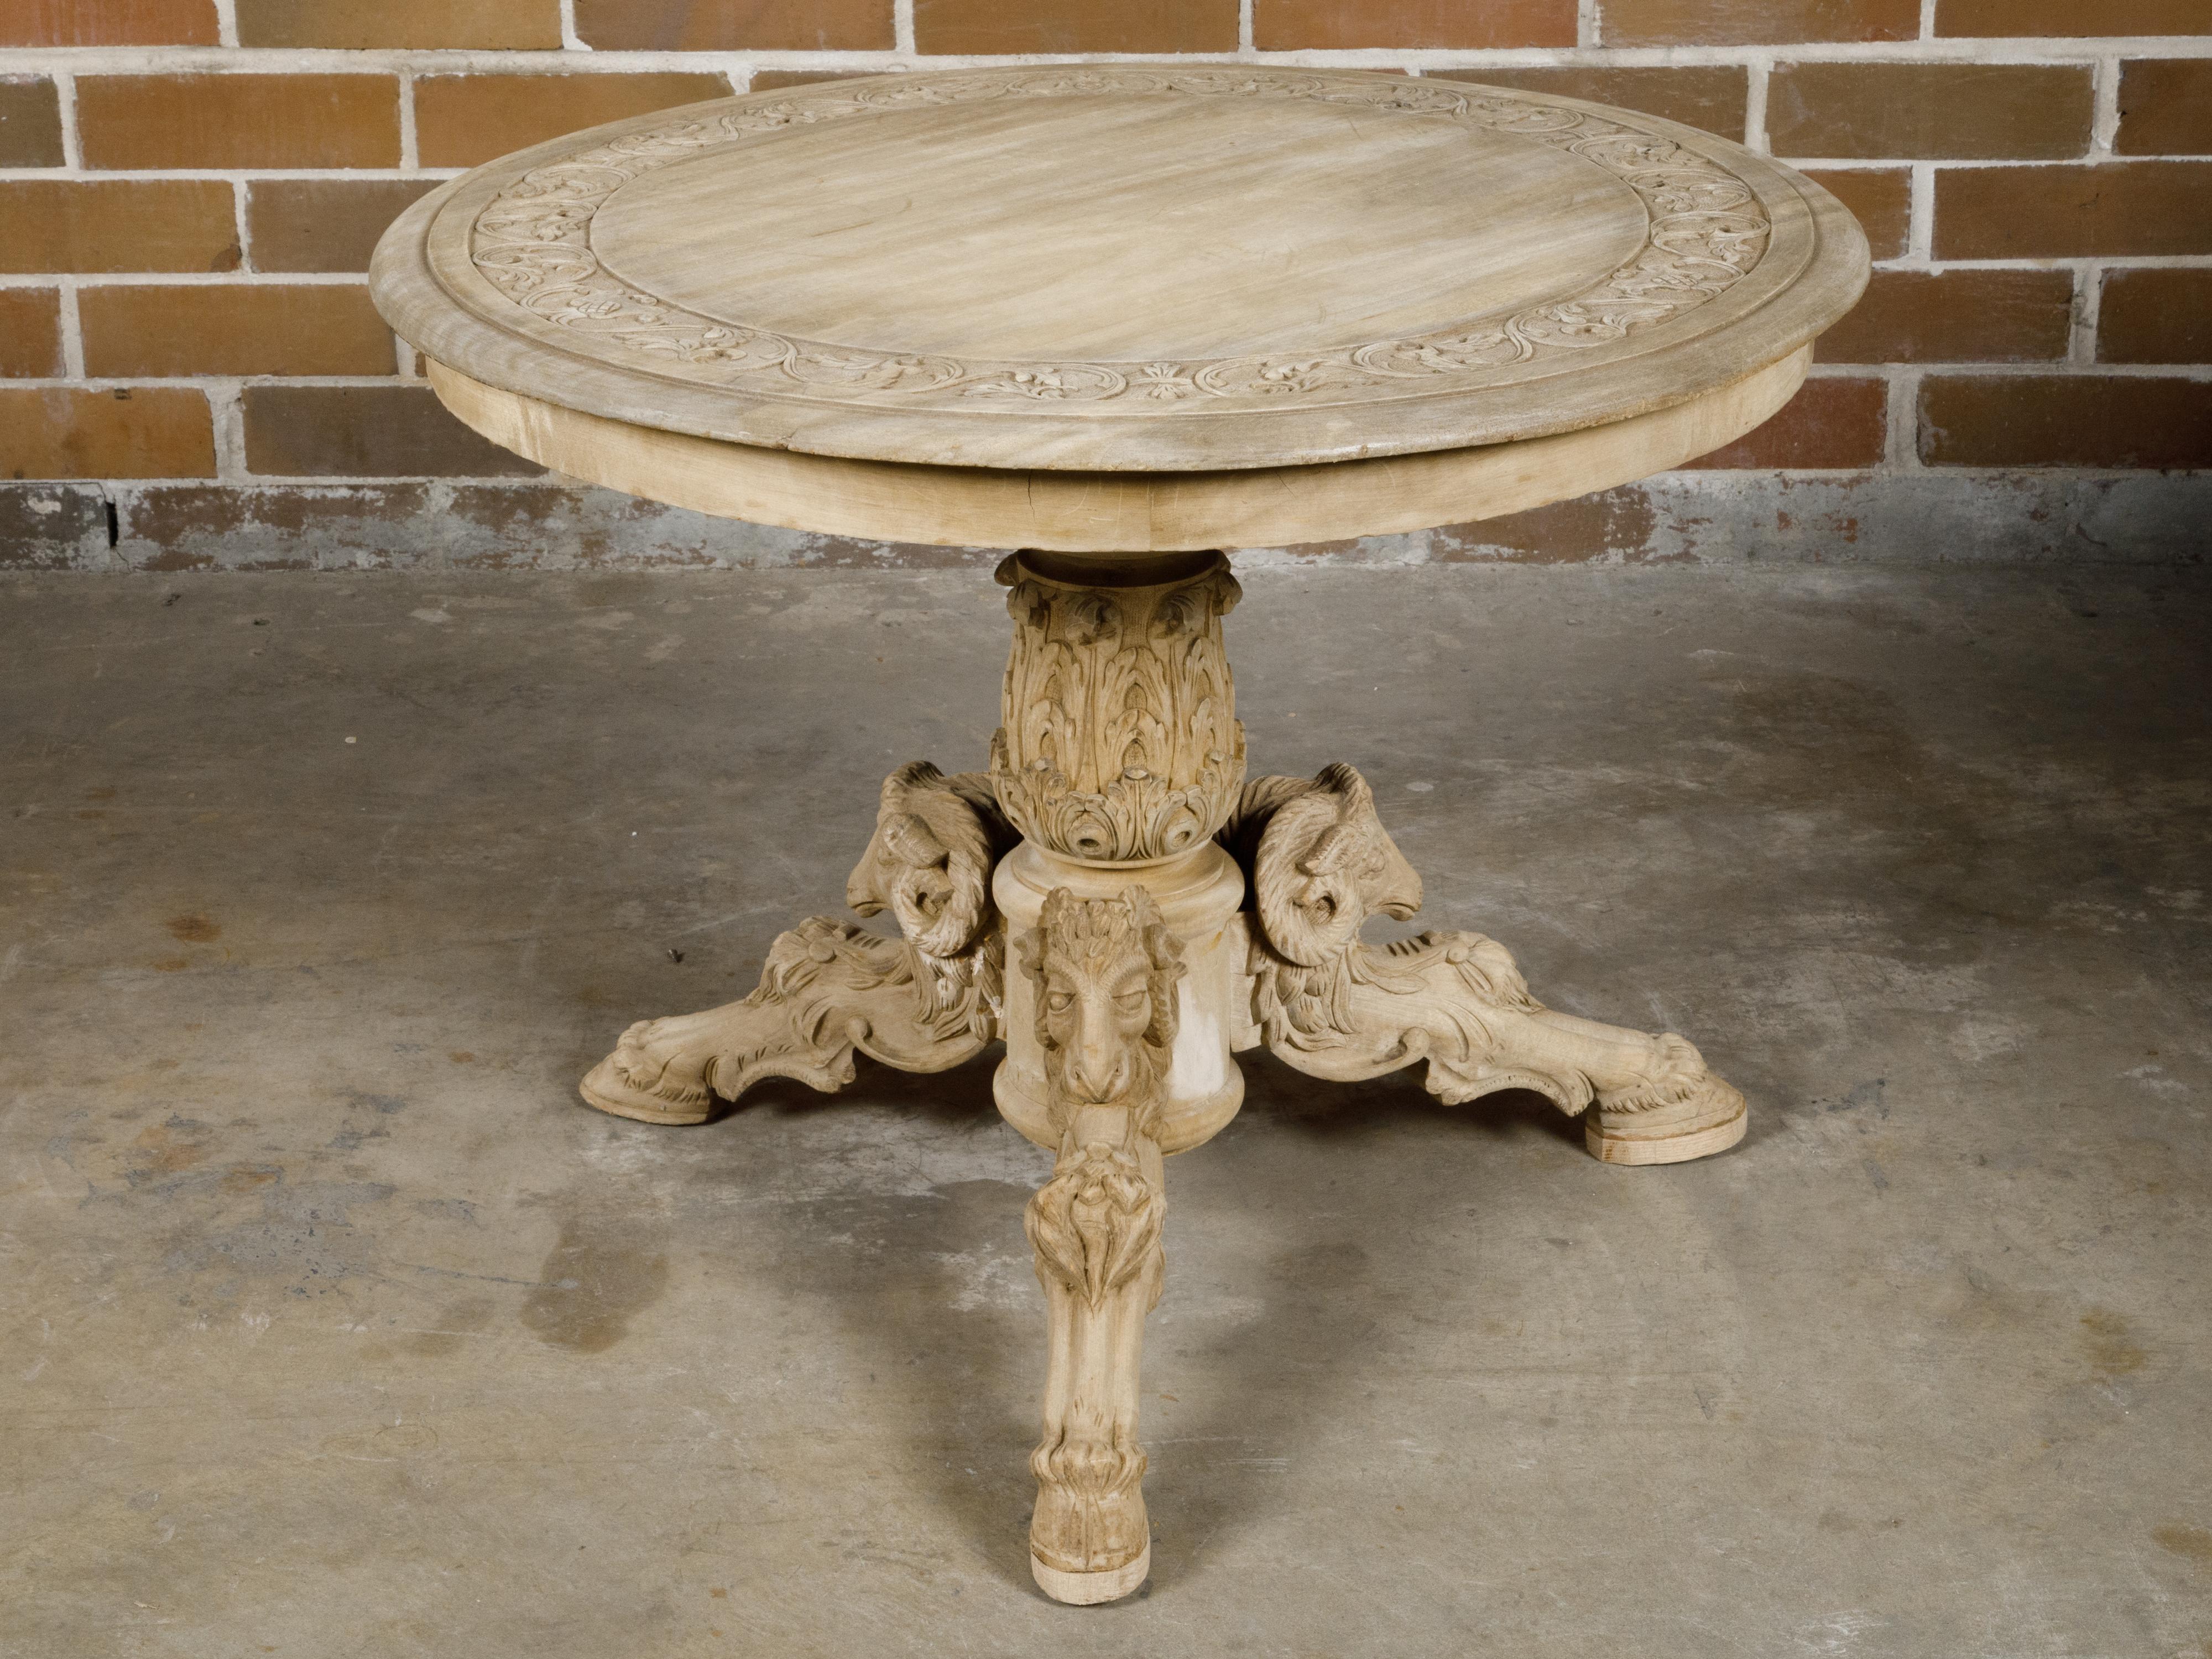 French 1900s Round Top Pedestal Table with Carved Rams' Heads and Scrollwork For Sale 7